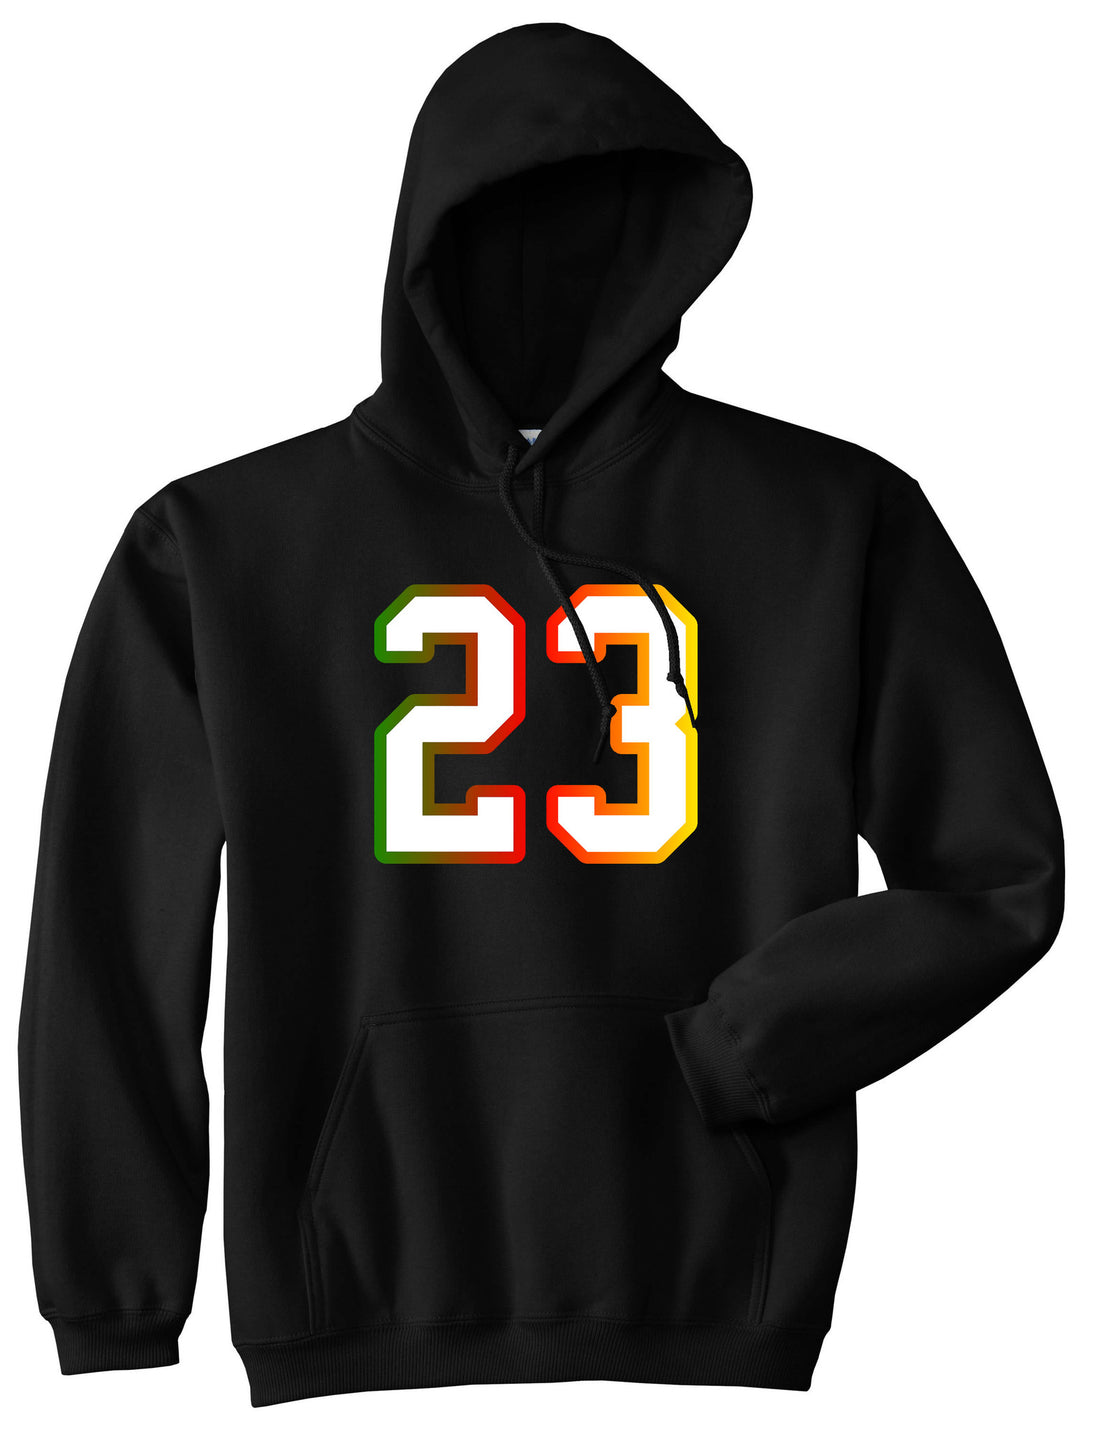 23 Cement Print Colorful Jersey Pullover Hoodie in Black By Kings Of NY